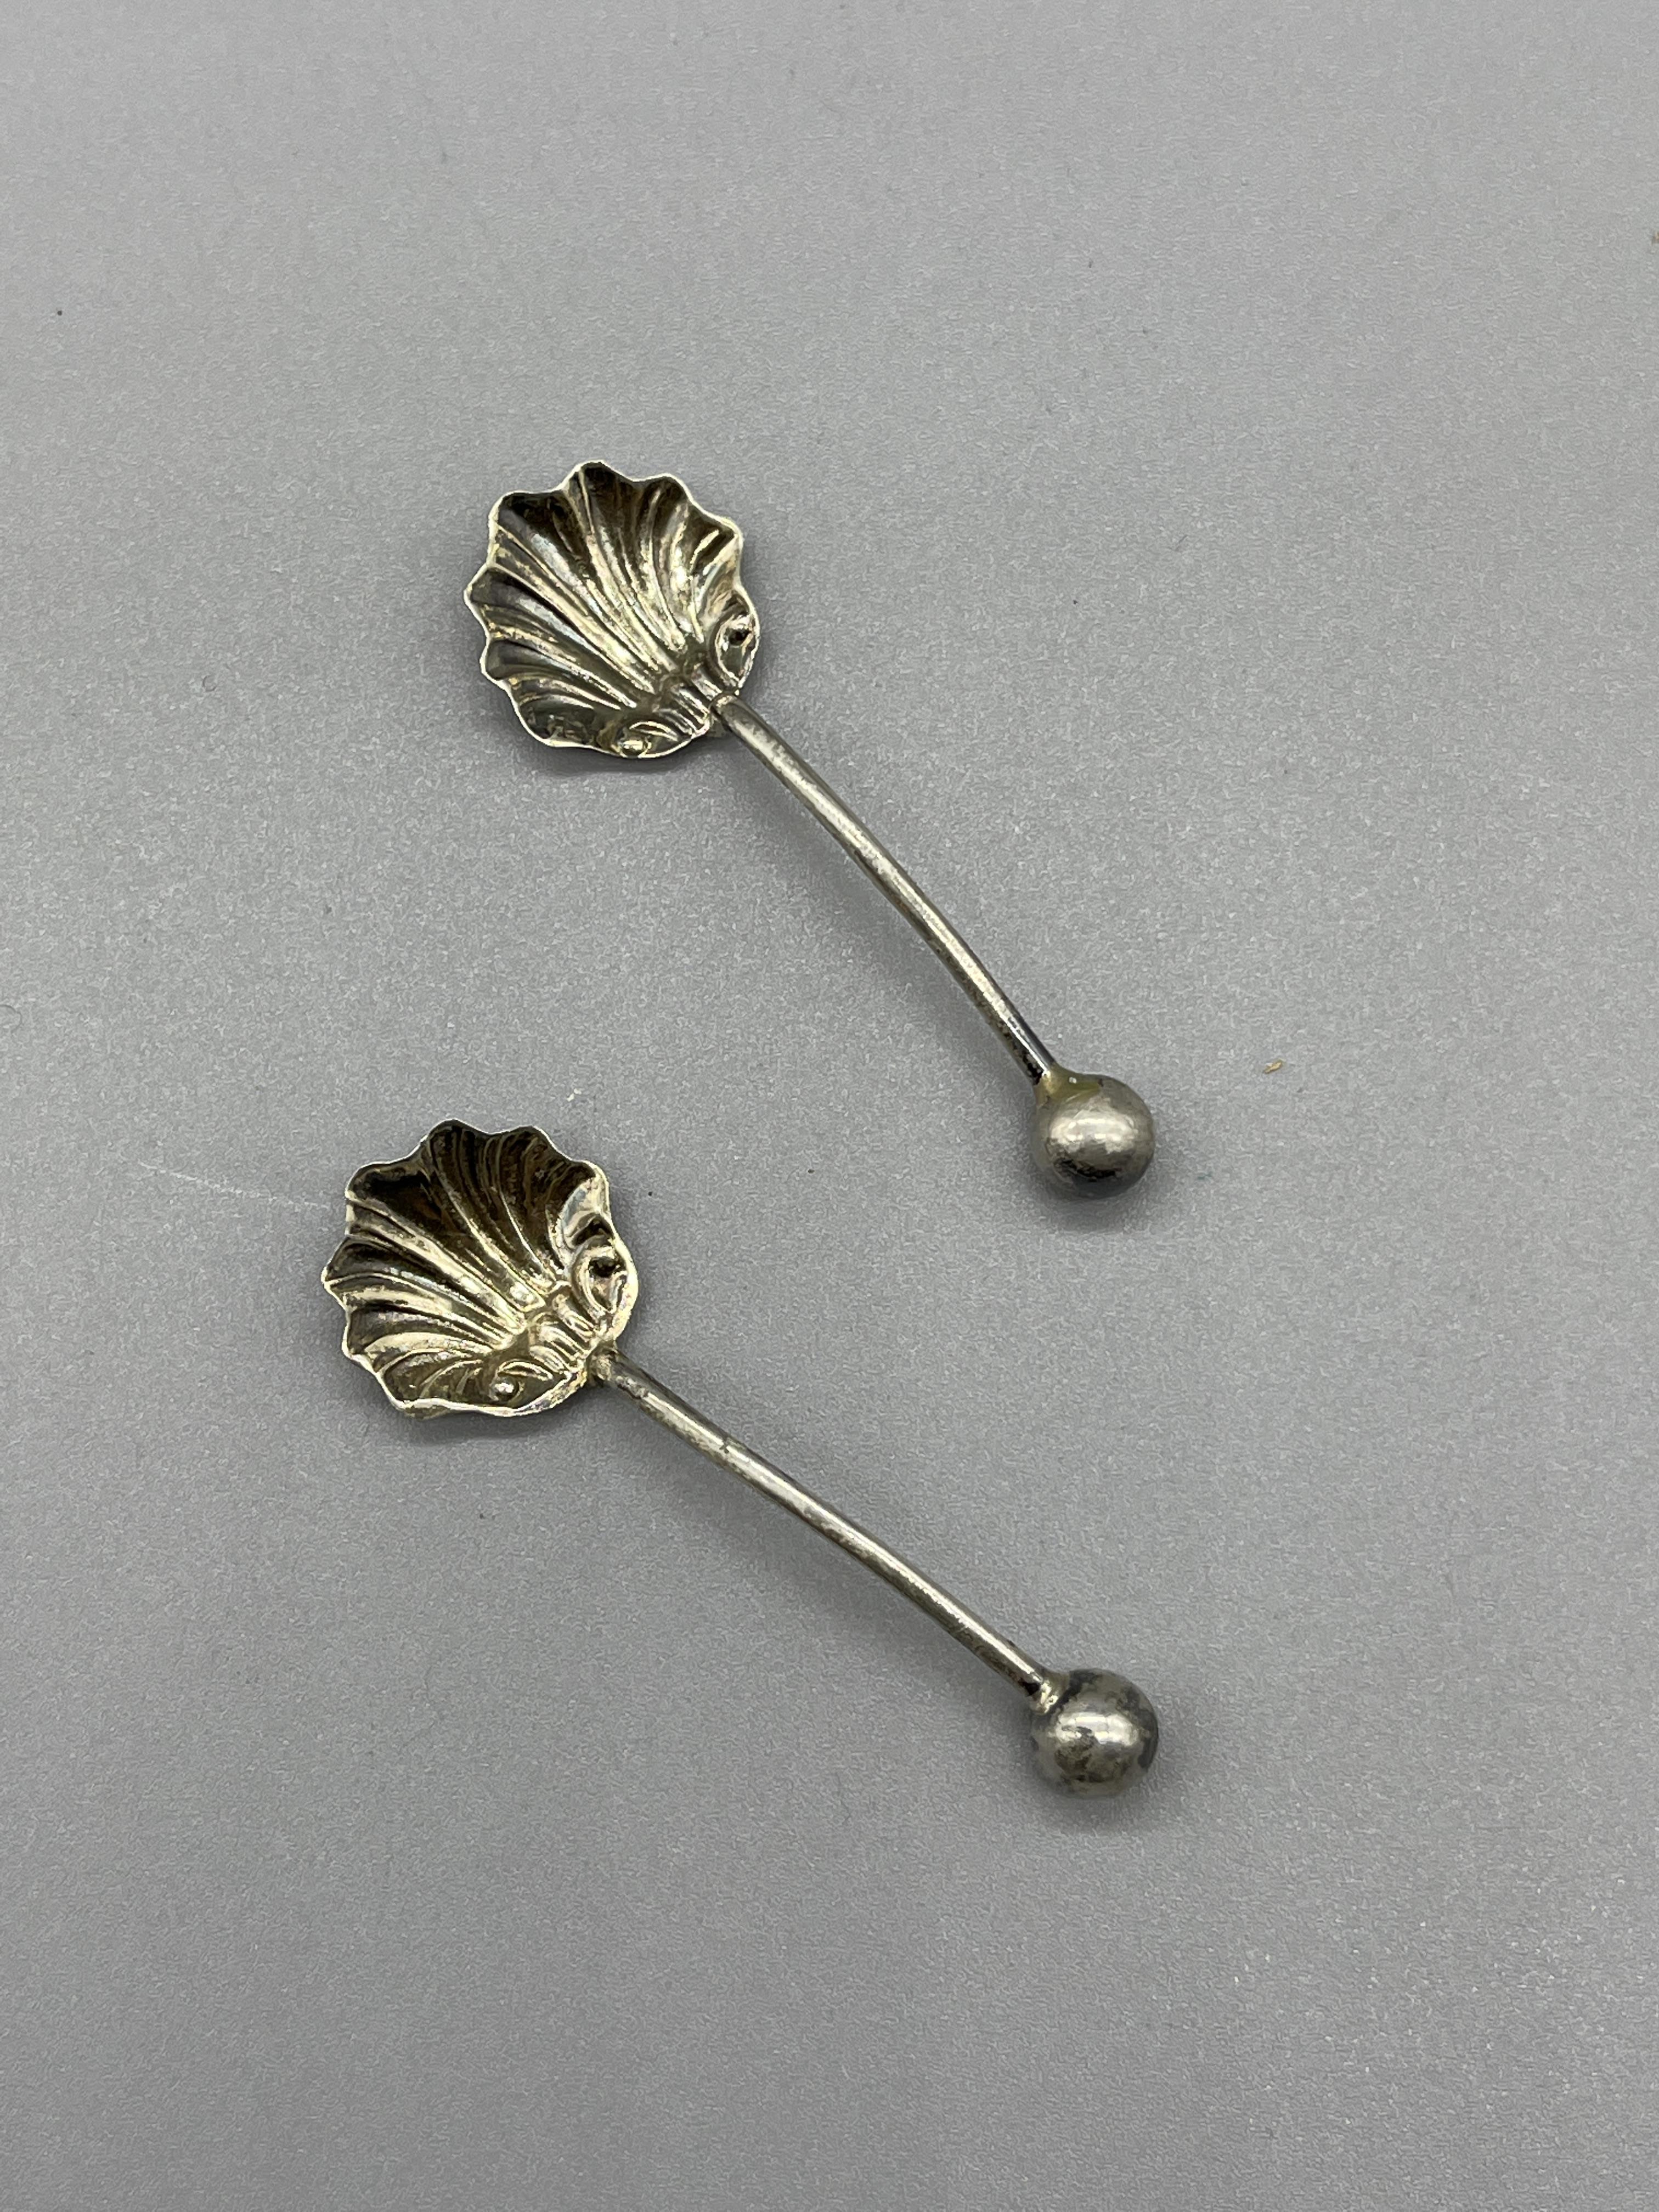 HM Silver cased shell salts and spoons.20G - Image 5 of 7